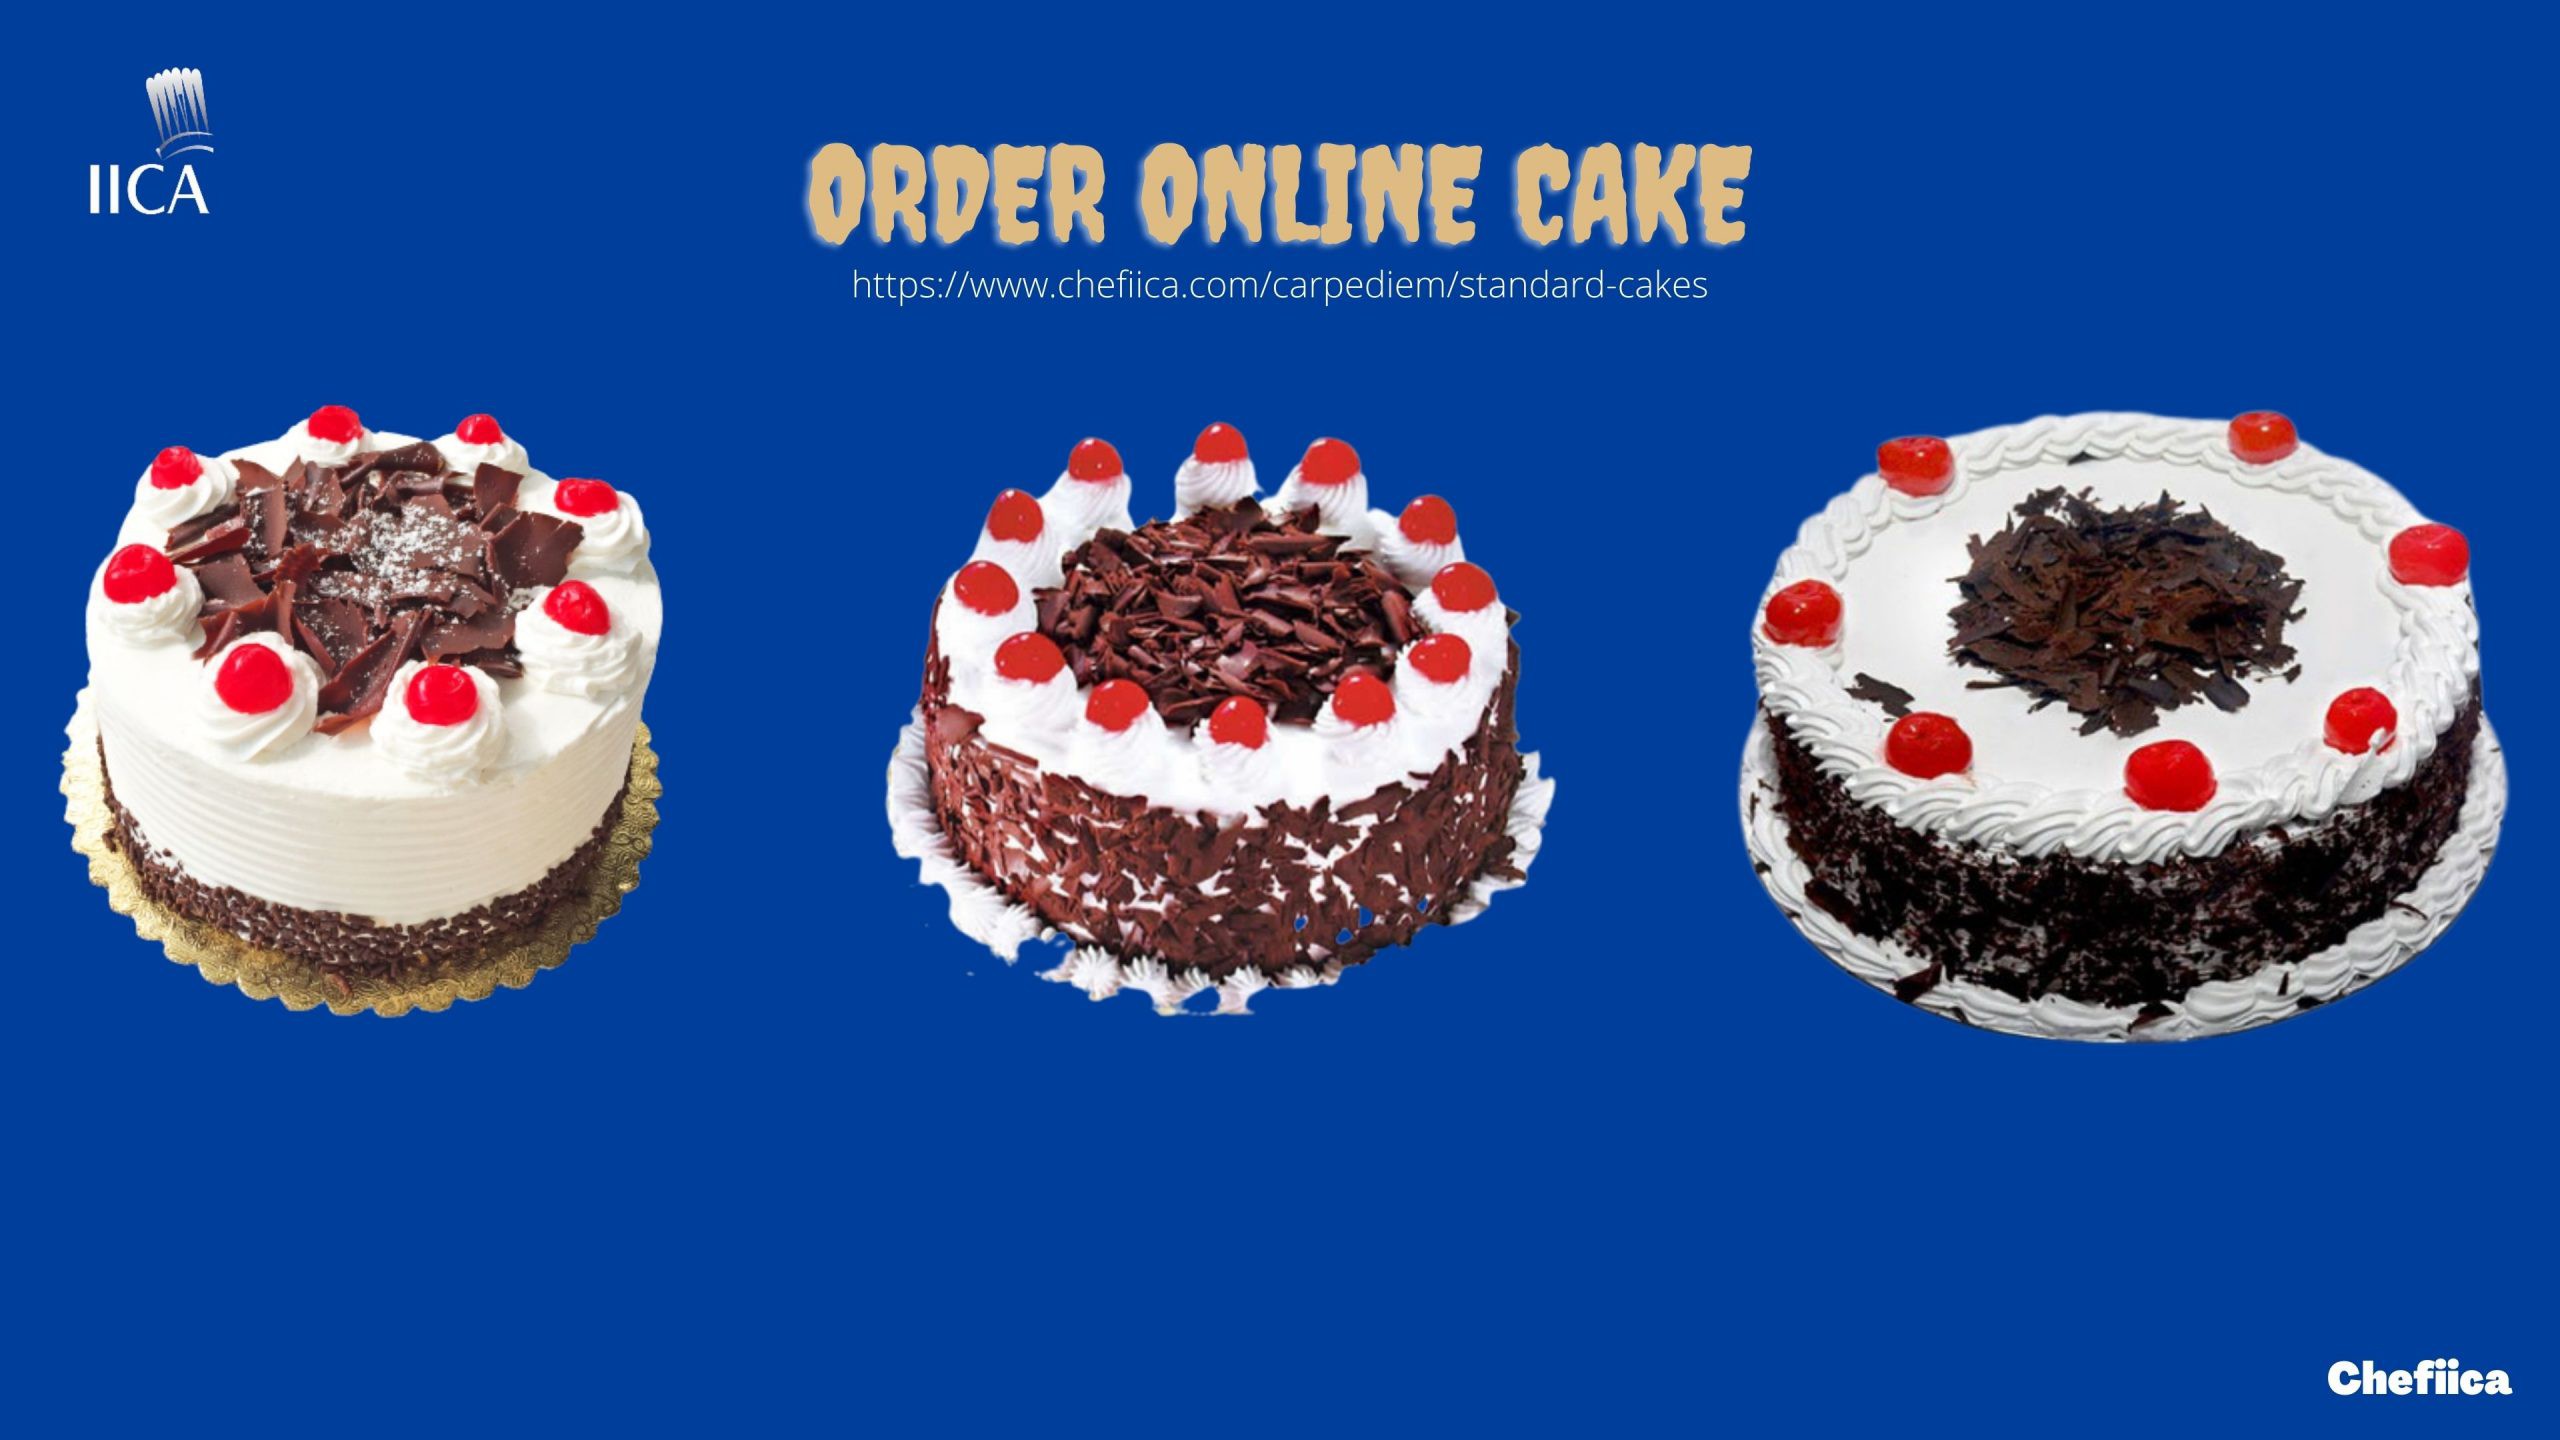 Order Online Cake From Chefiica in Gurgaon